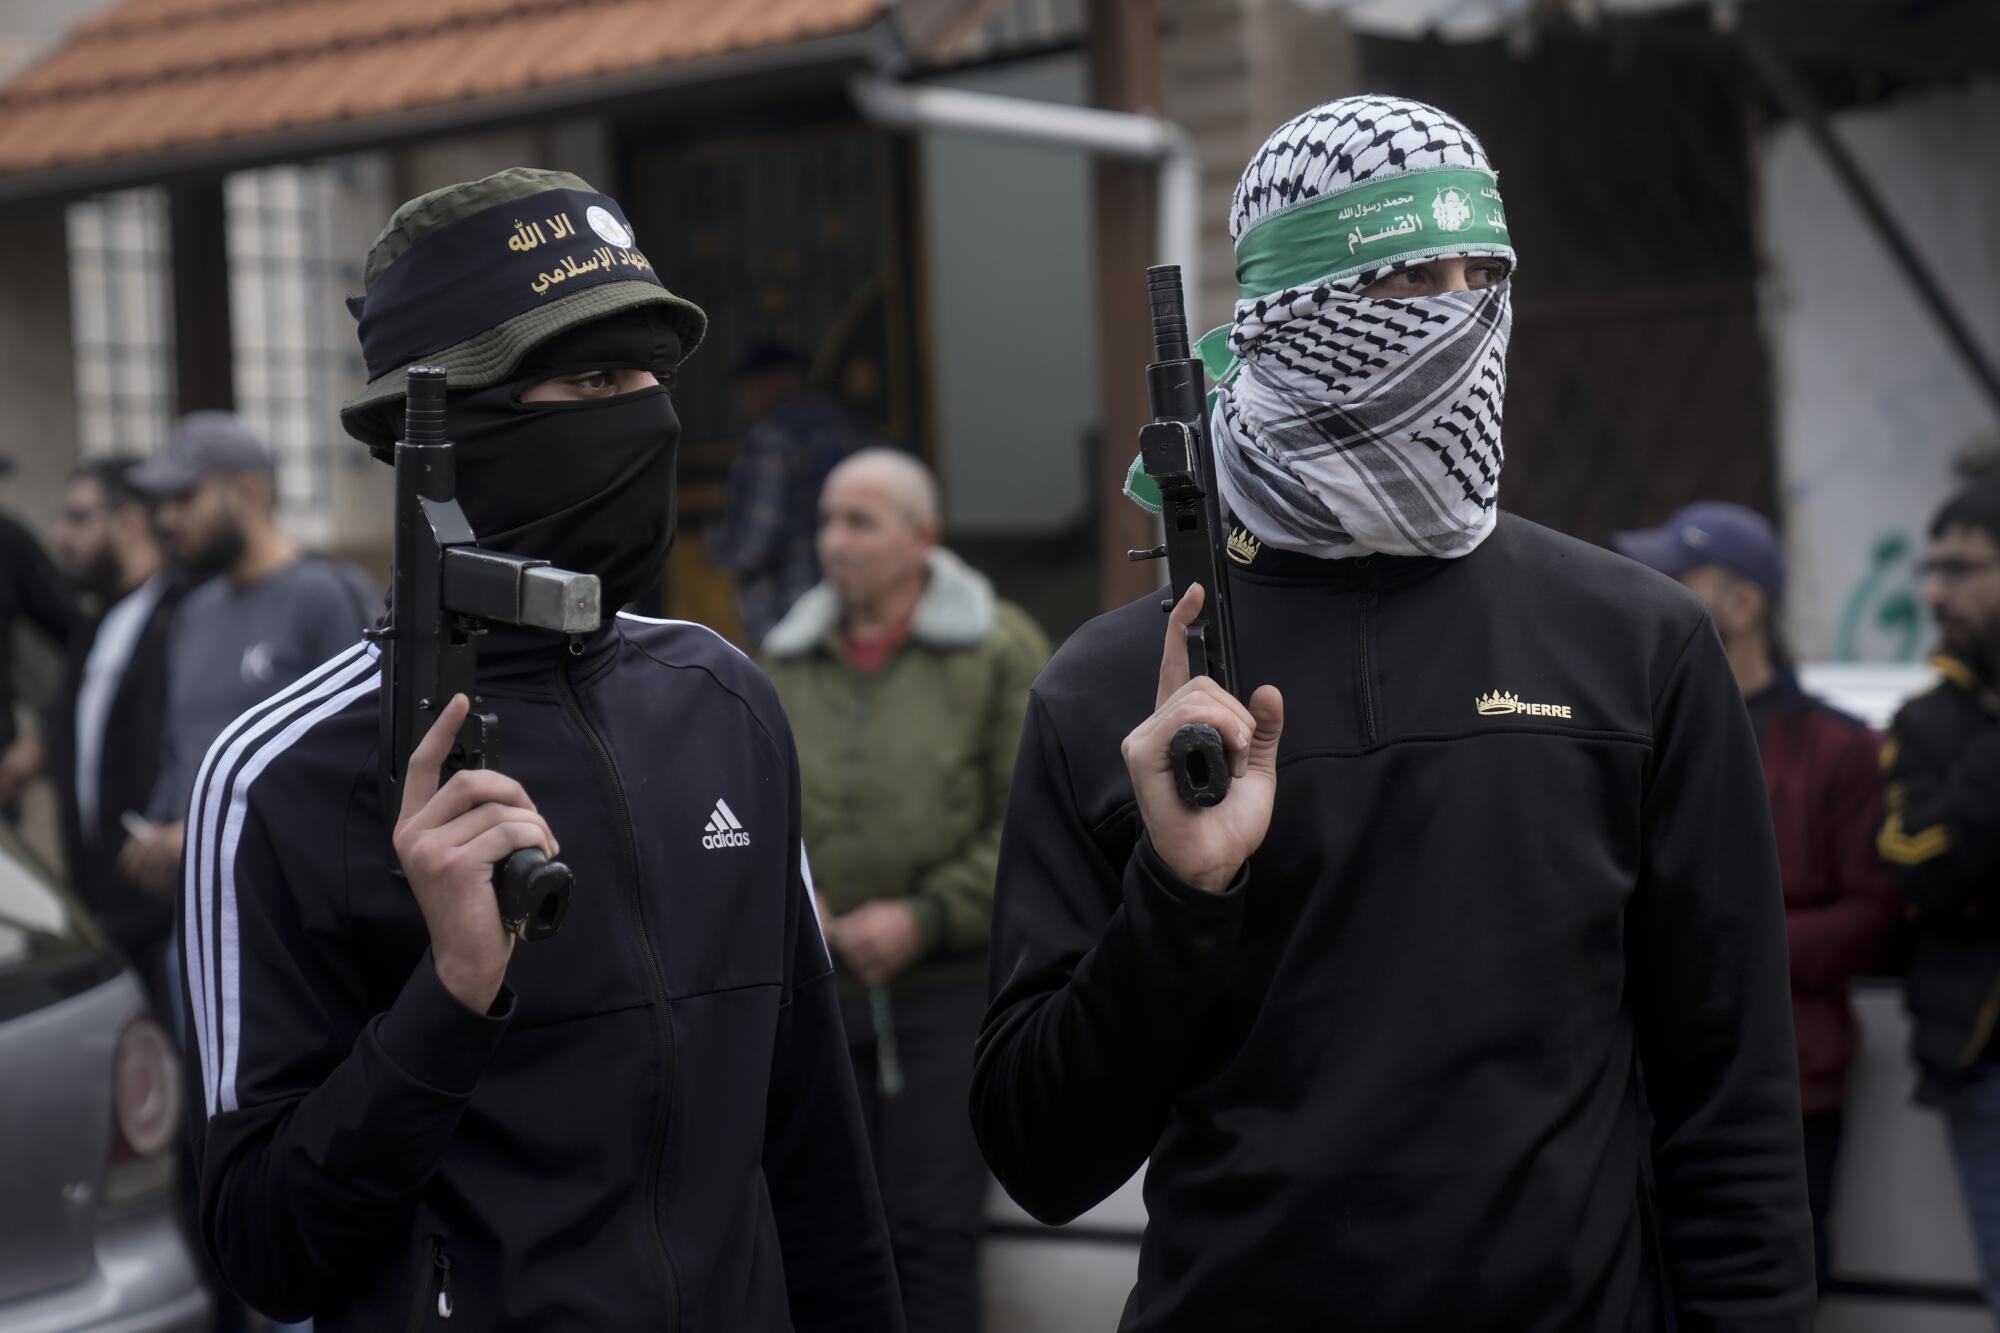 Palestinian gunmen at a funeral in the occupied West Bank